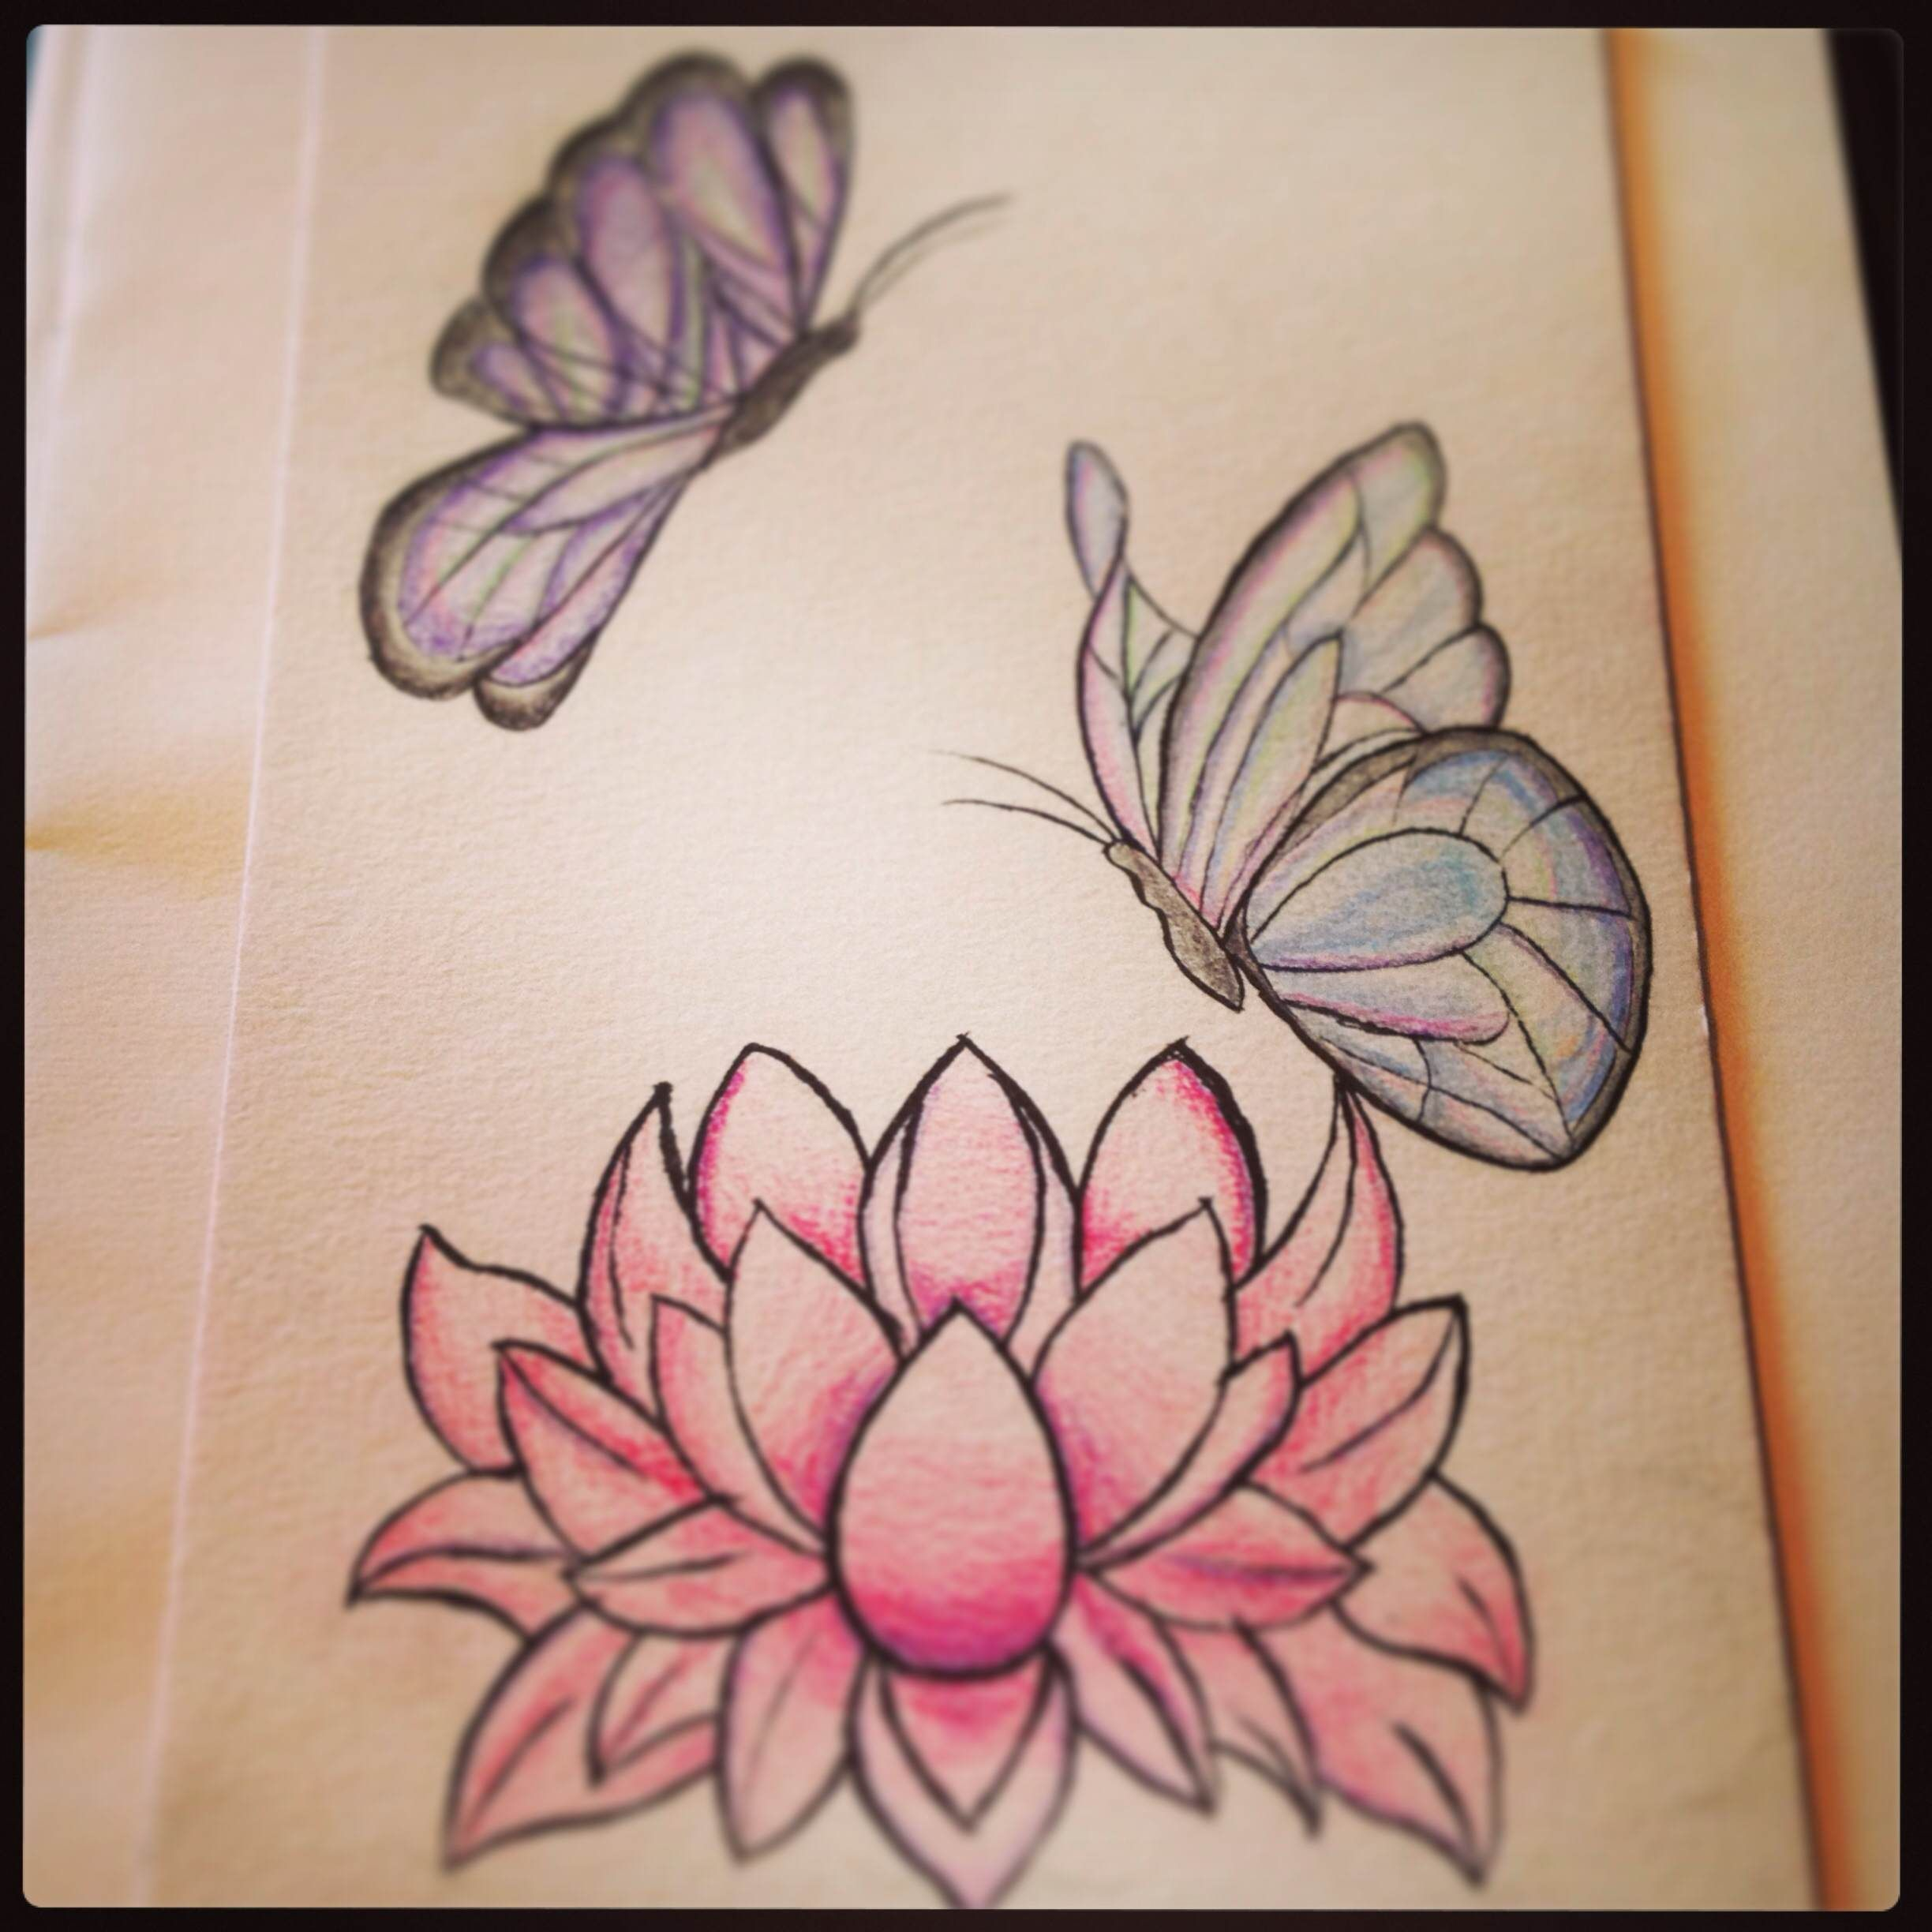 My Lotus Flower And Butterfly Tattoo Design Lotus Flowers Grow within dimensions 2448 X 2448